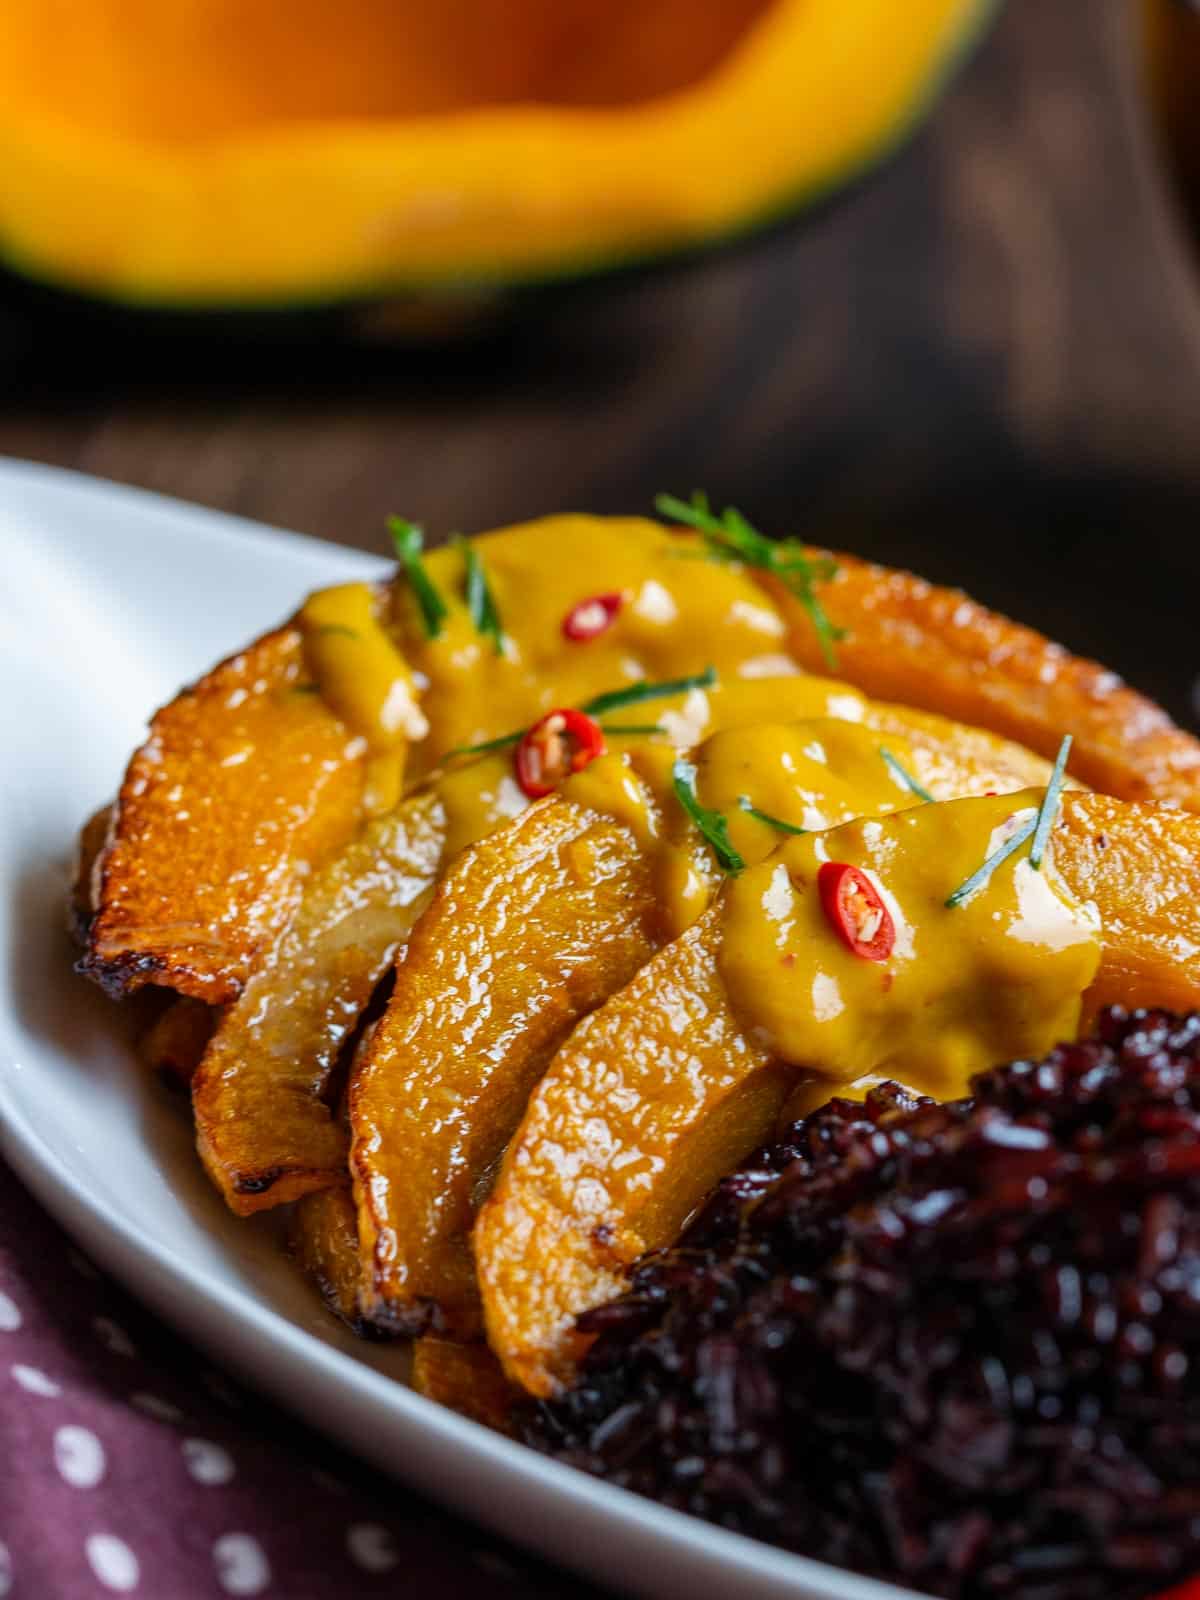 Thick Thai curry sauce drizzled over roasted kabocha squash and a side of black rice.